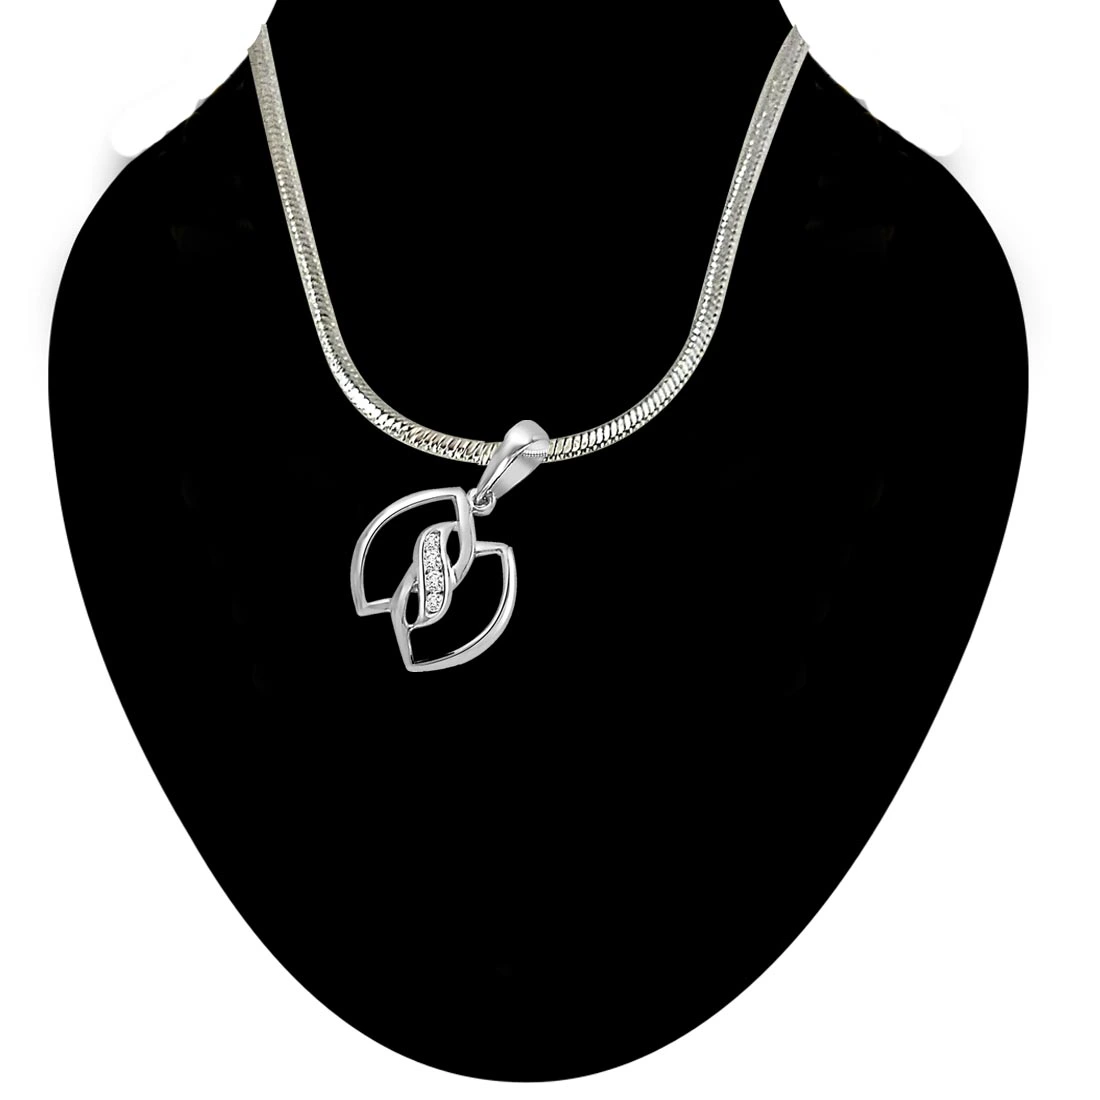 Leaves of Togetherness - Real Diamond & Sterling Silver Pendant with 18 IN Chain (SDP97)